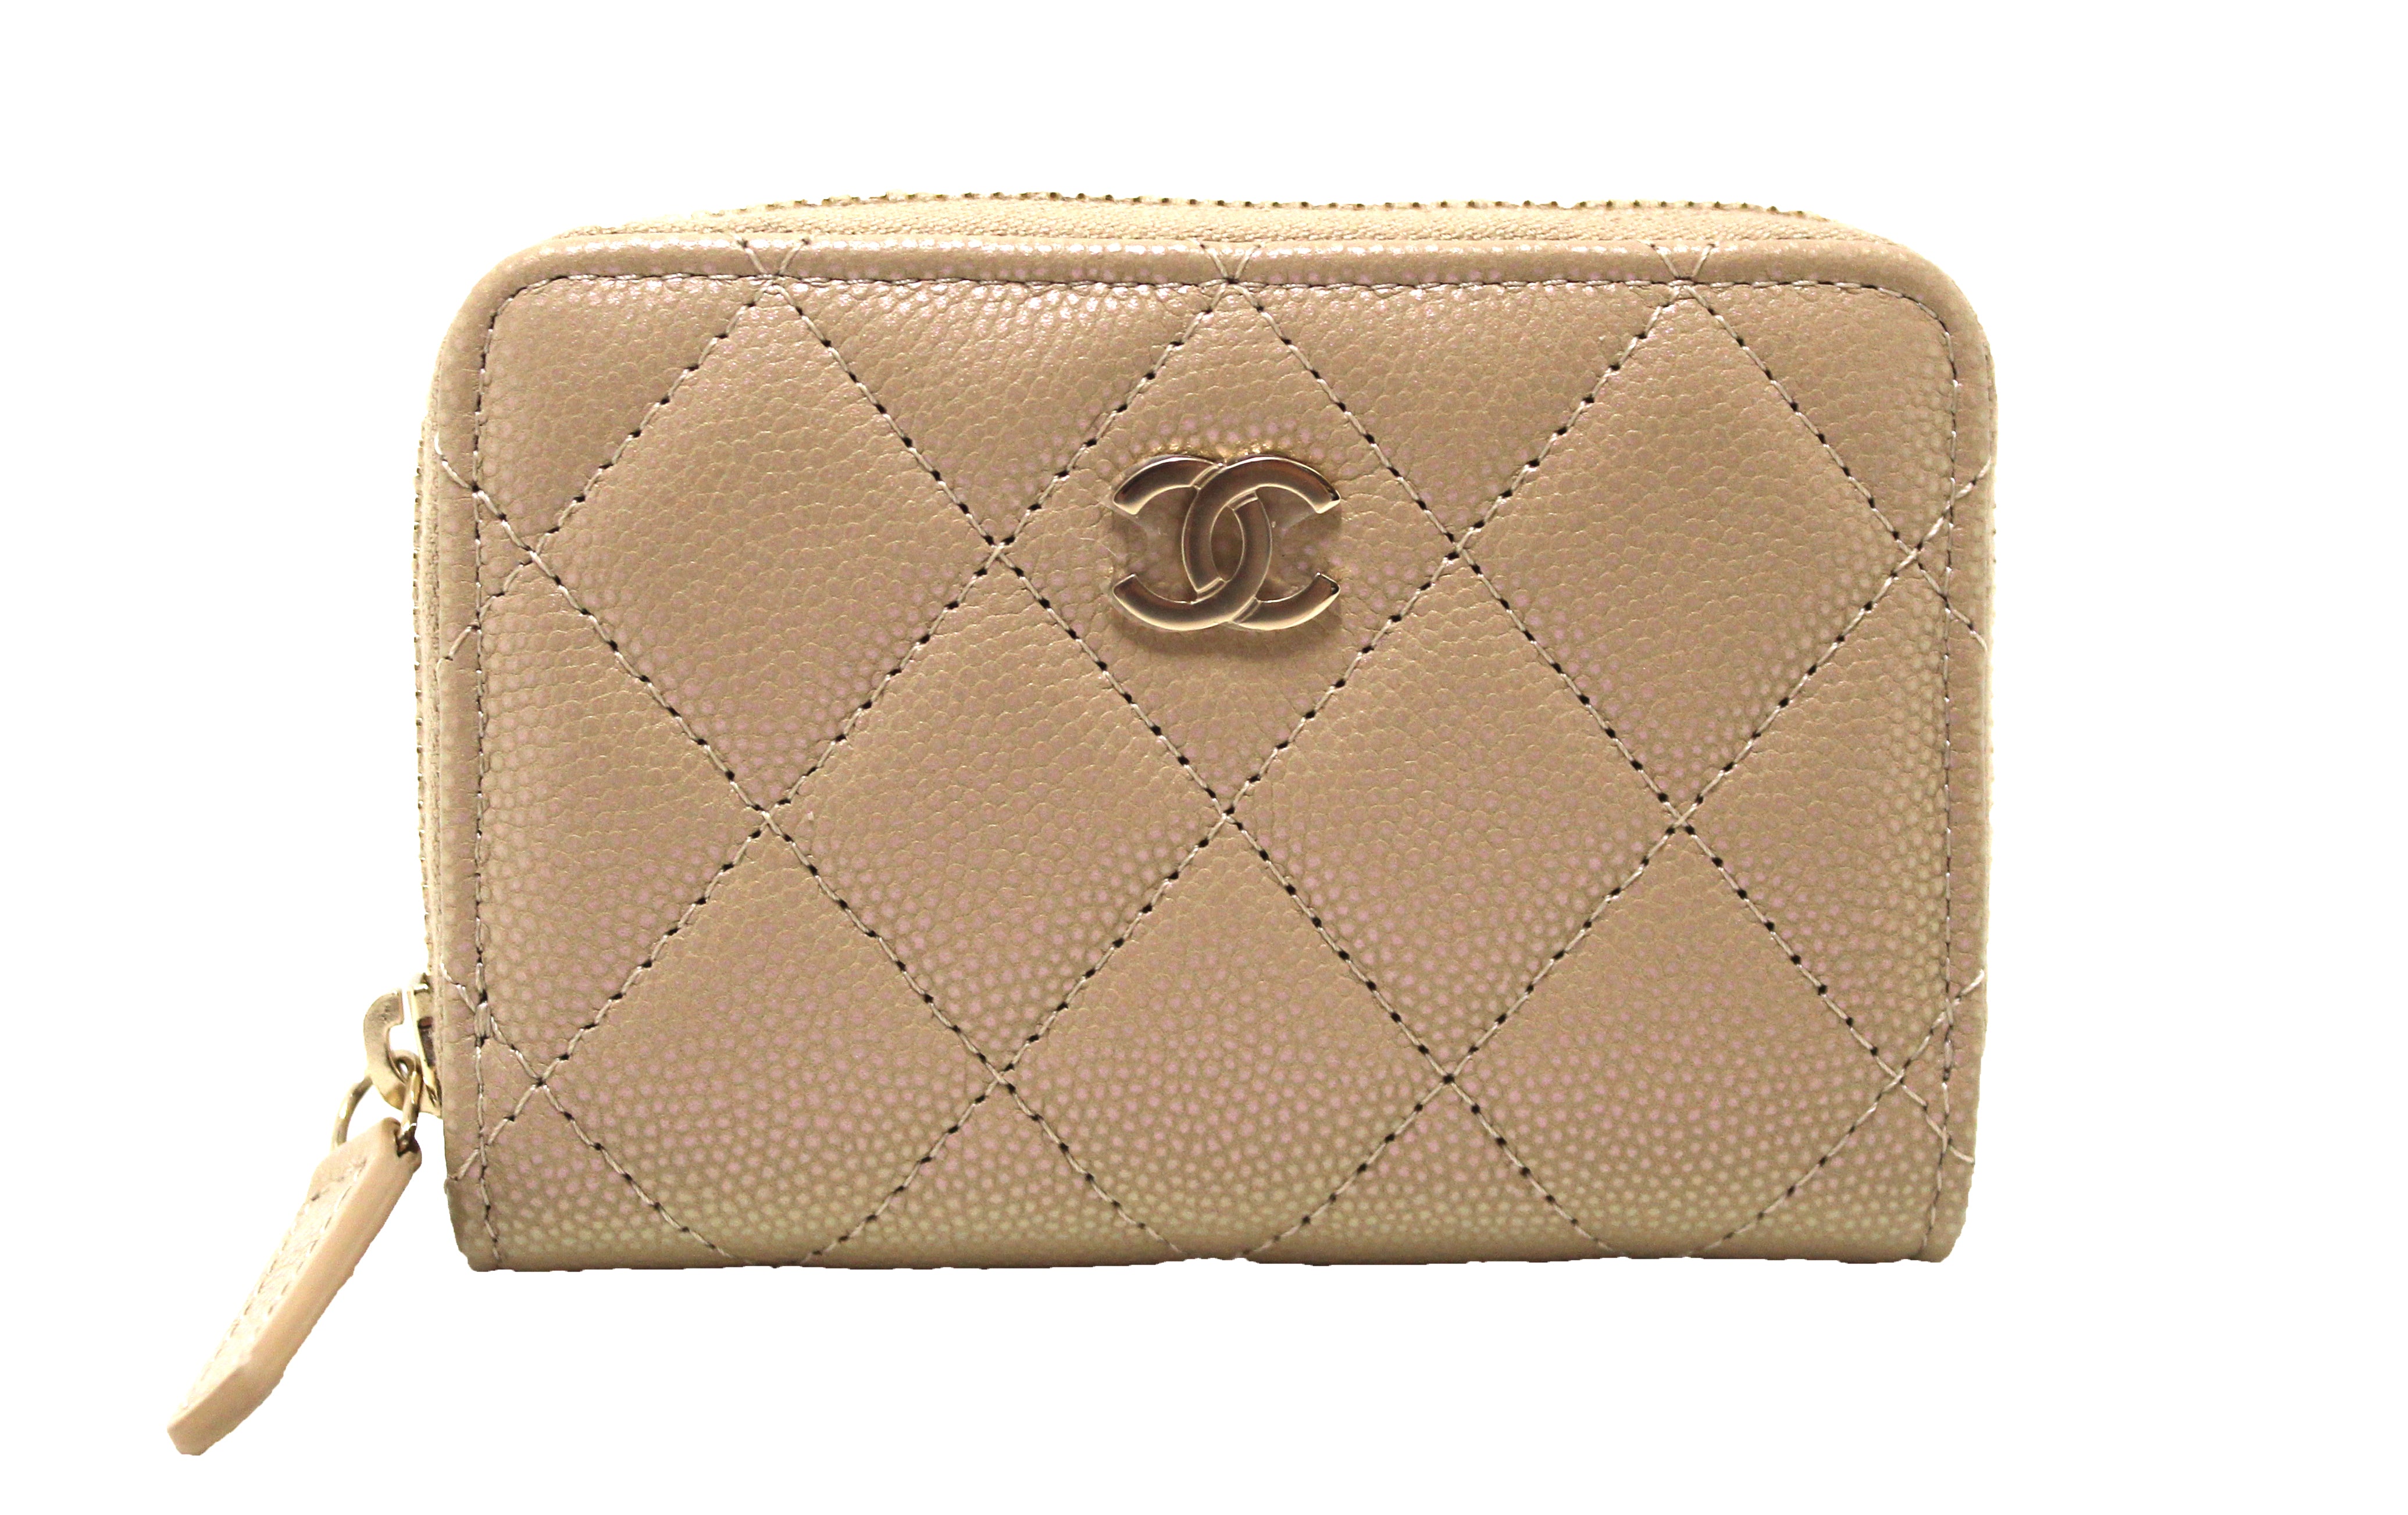 AUTHENTIC Chanel Classic Zipped Coin Purse